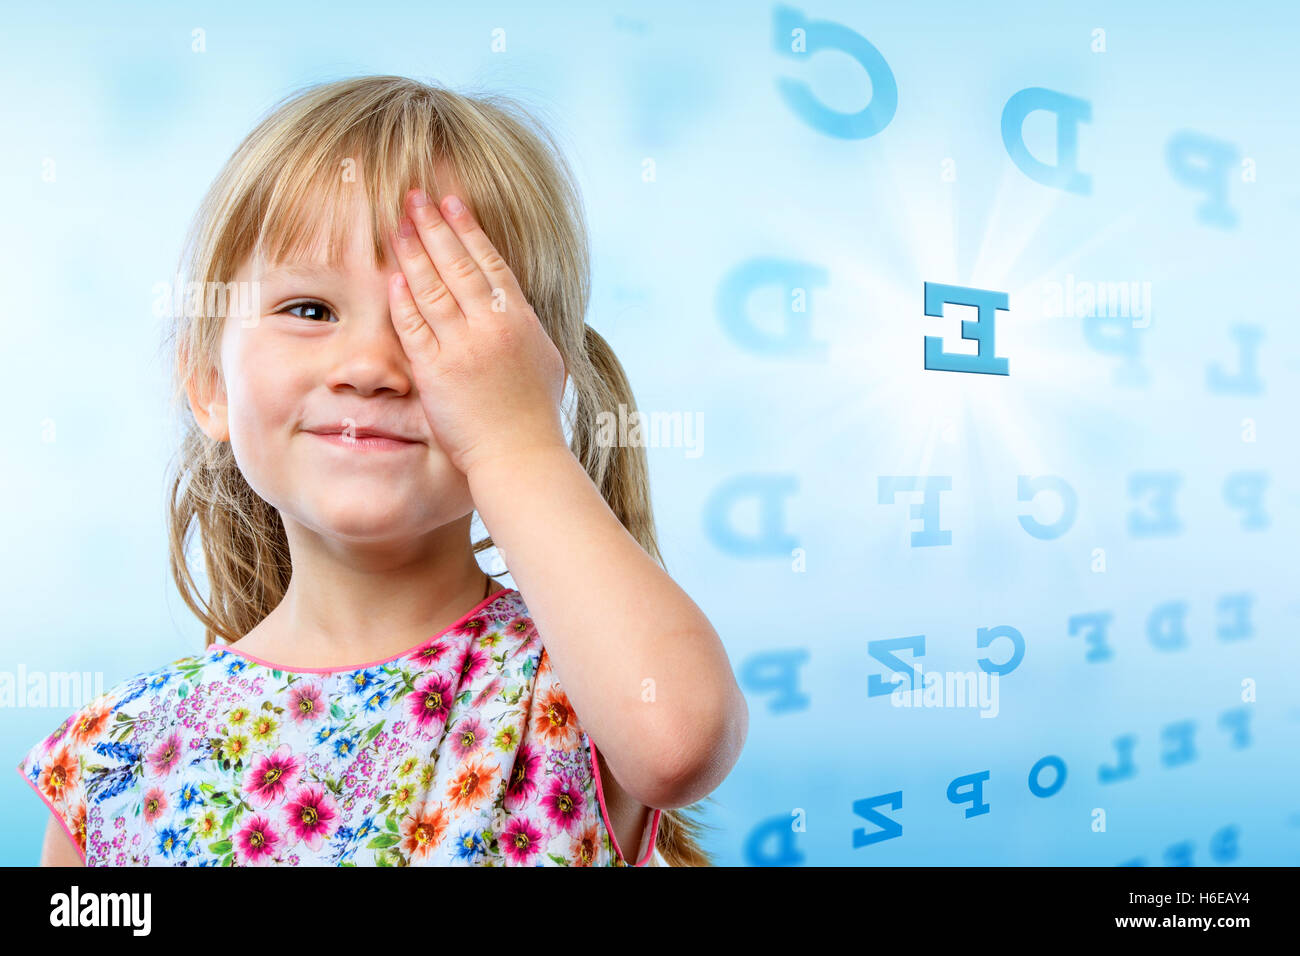 Close up portrait of little girl reading eye chart. Young kid testing one eye on block letter vision chart. Stock Photo